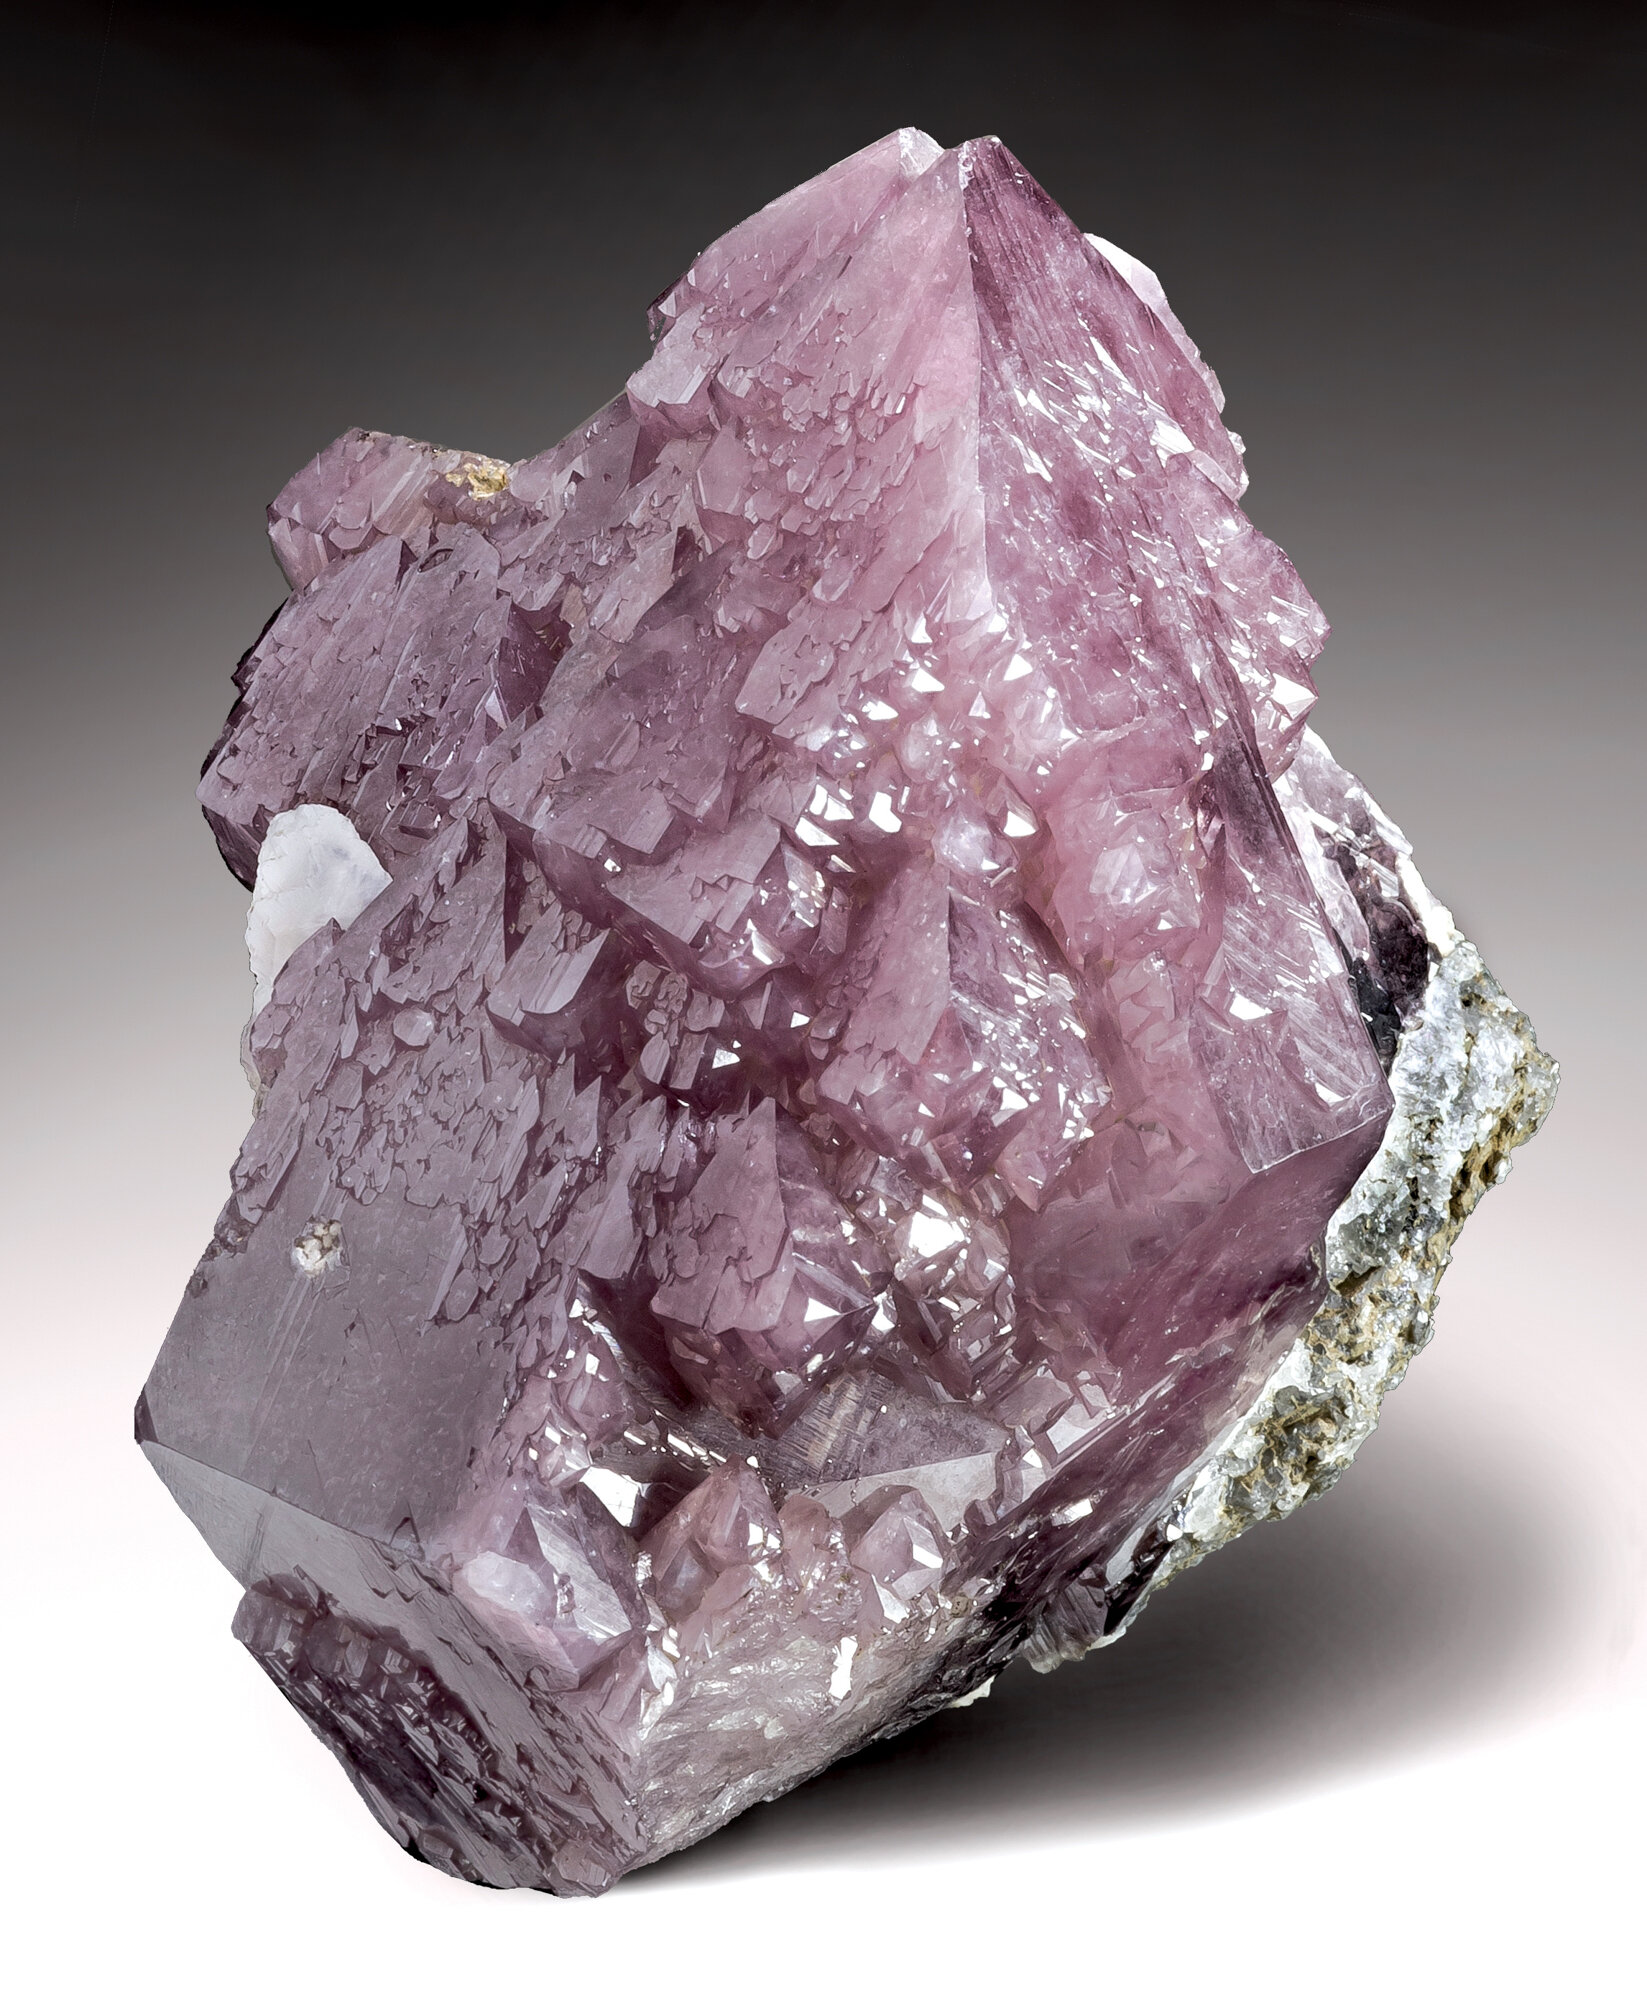  Purple scheelite crystal, 6.5 cm, from Huanggang mine No. 5, Keshiketeng County, Chifeng Prefecture, Inner Mongolia Autonomous Region, China. Found in April 2012. 